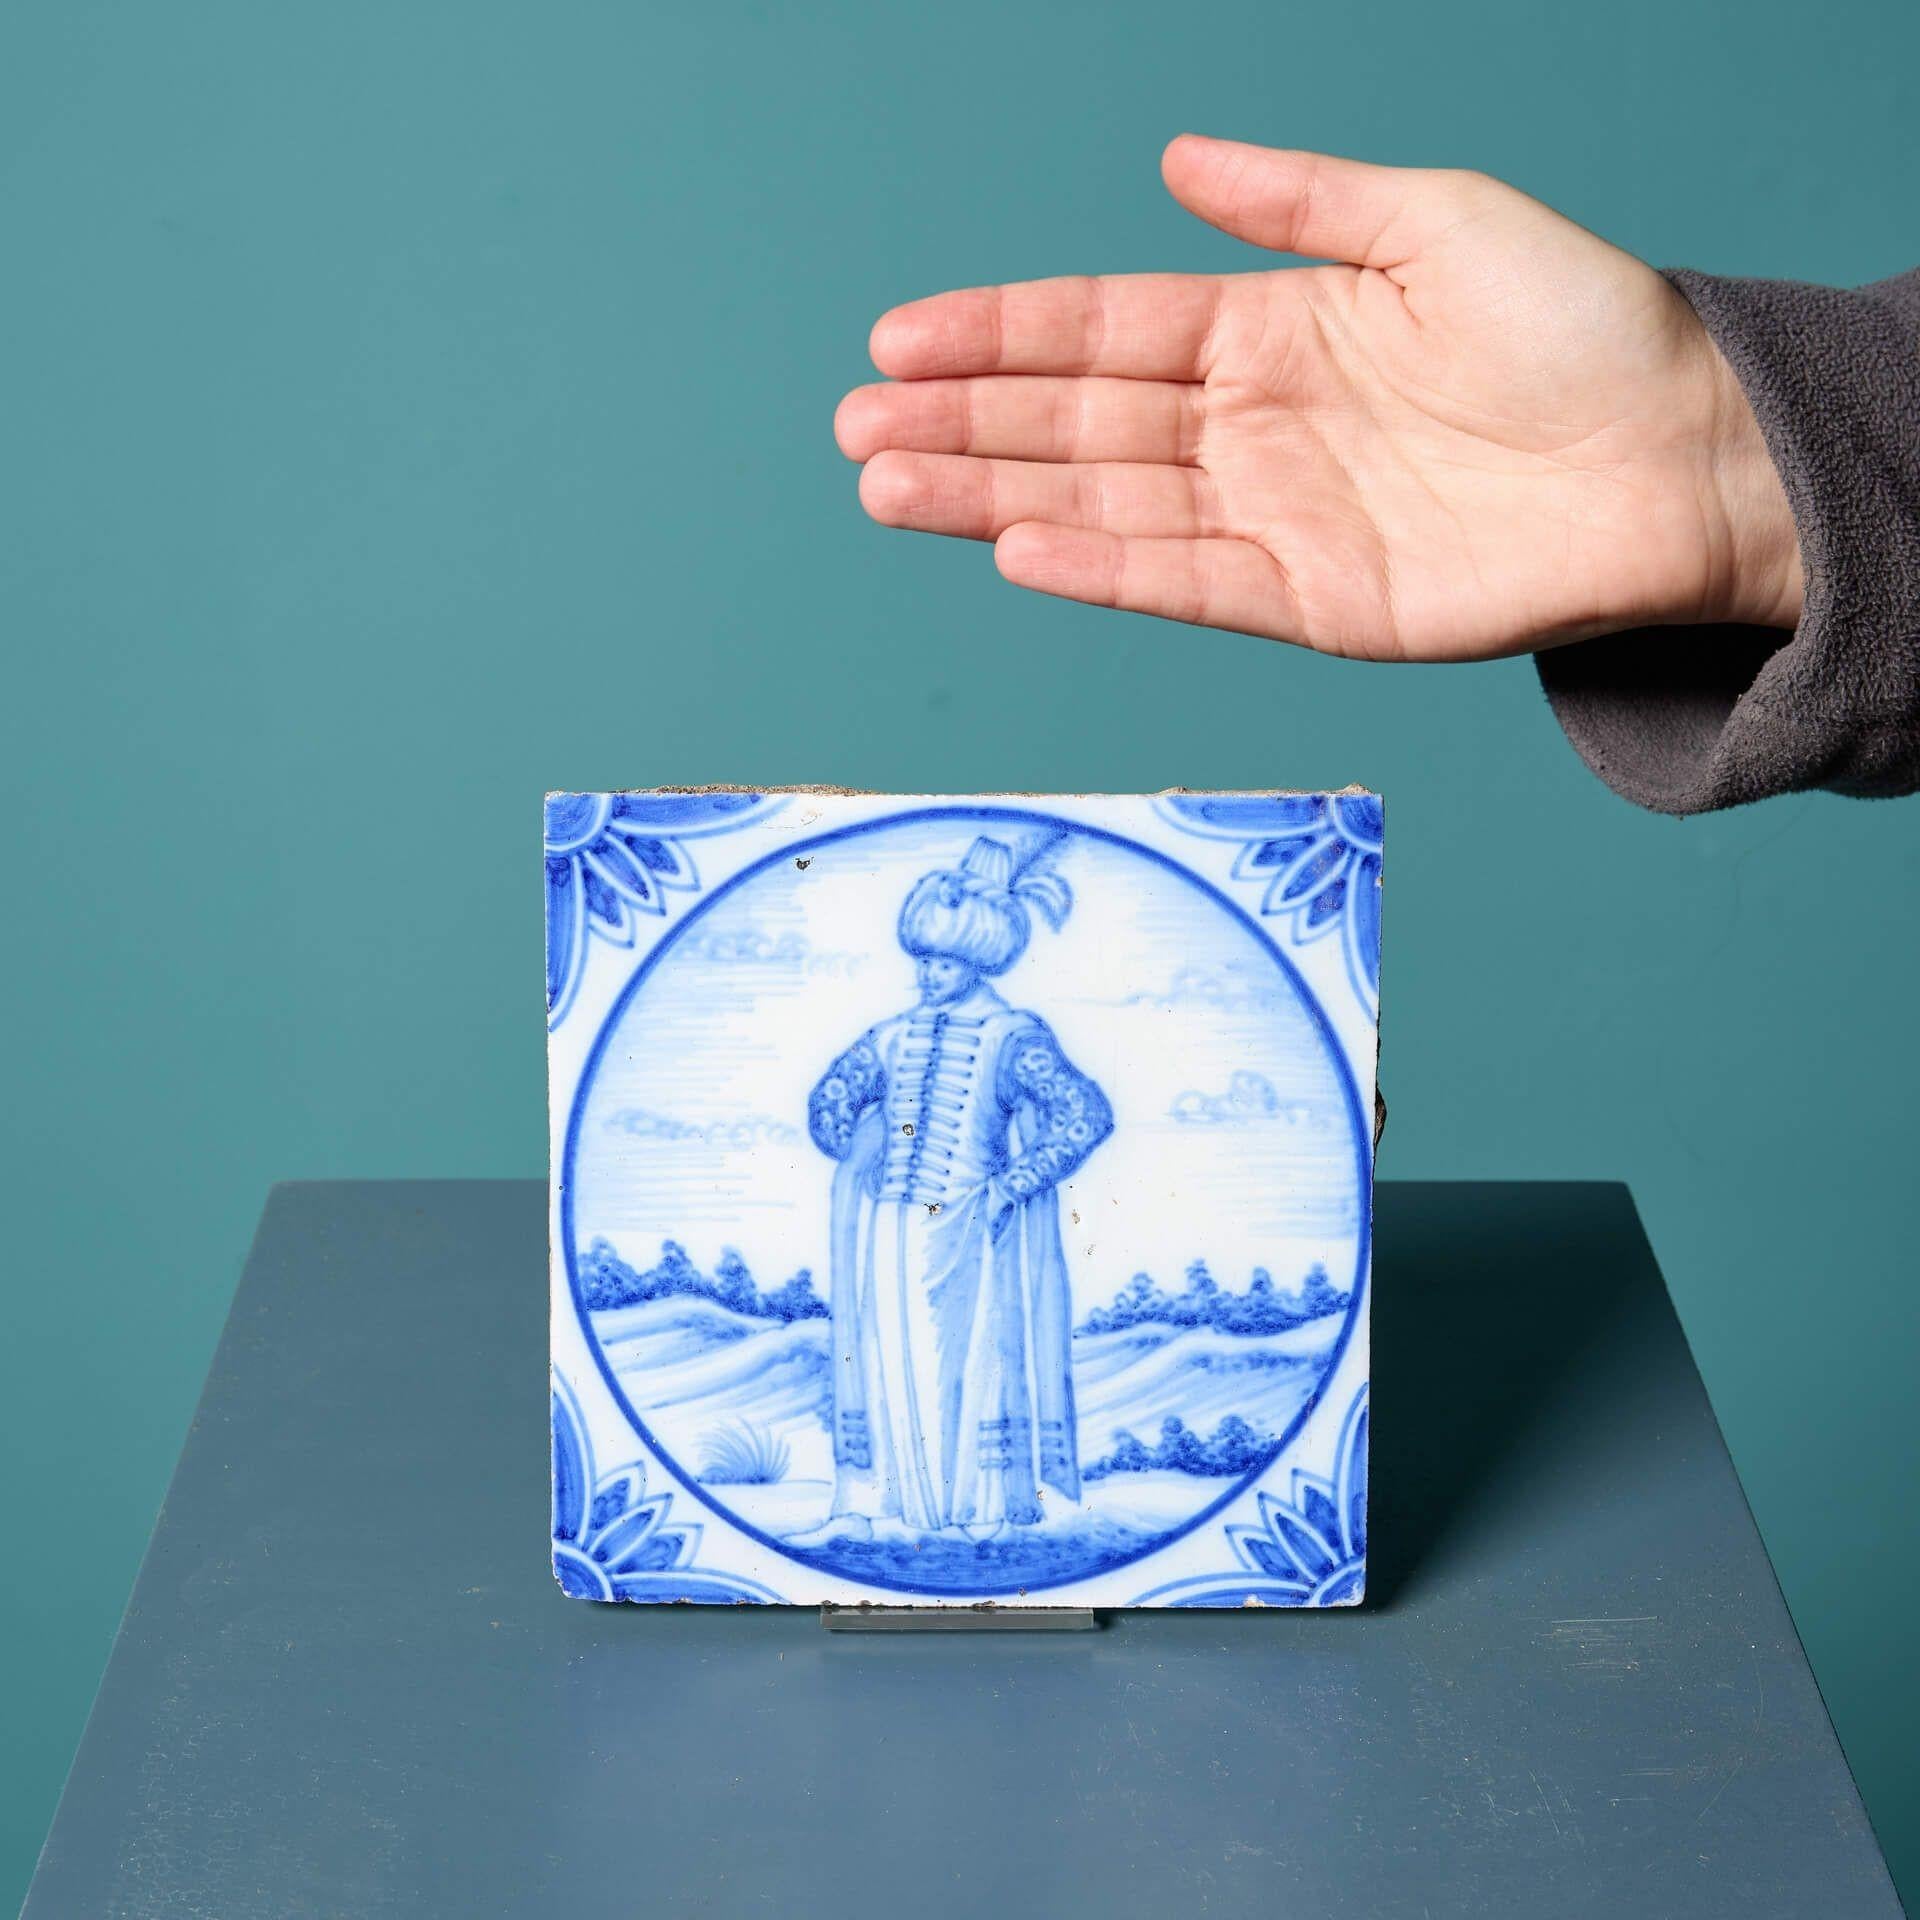 An antique Delft tile of a figure in Turkish dress, circa 1870, made by Ravesteijn of Utrecht, after the original drawing by Nicolas De Nicolay dating to circa 1551.

This striking tile has been in use for over 150 years and as such has a